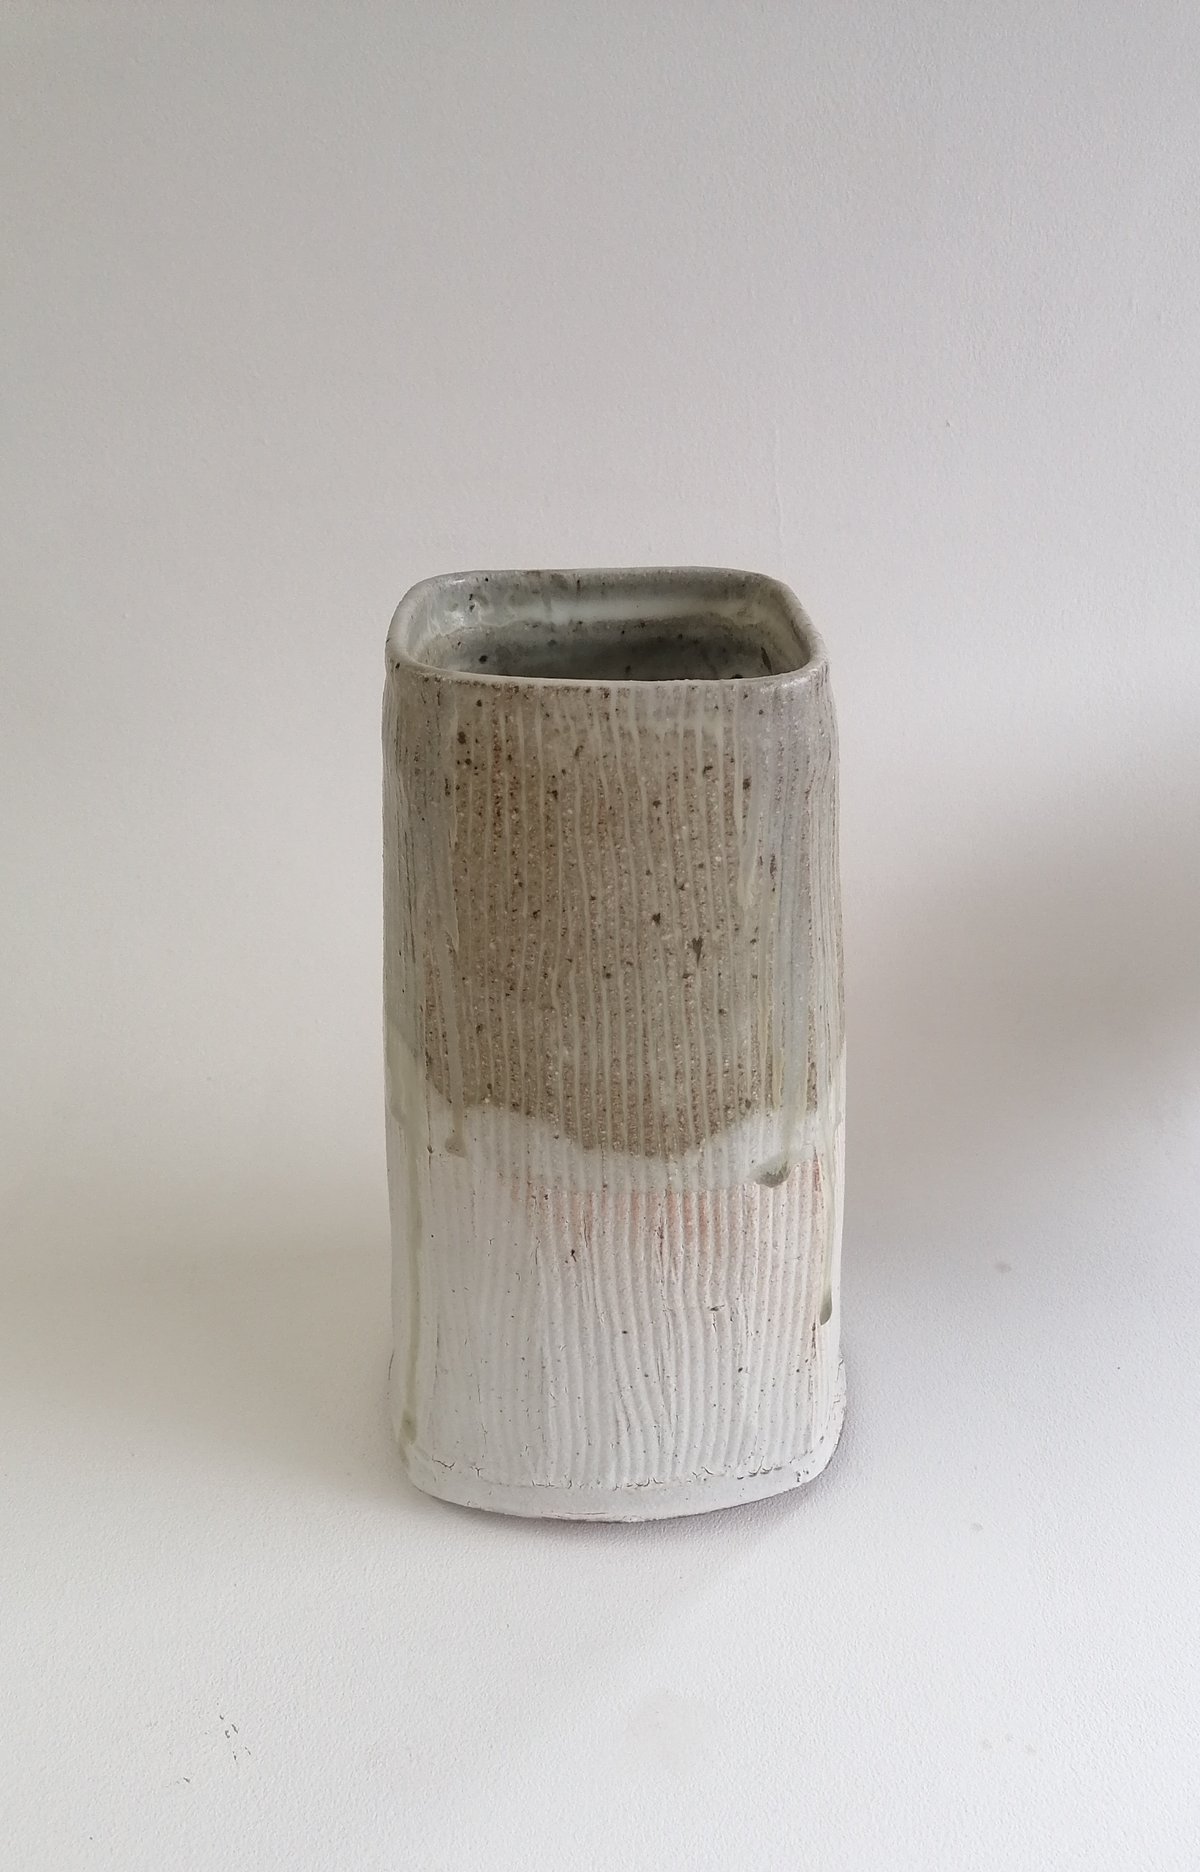 Image of Another squared vase/large utensil pot. Sale item